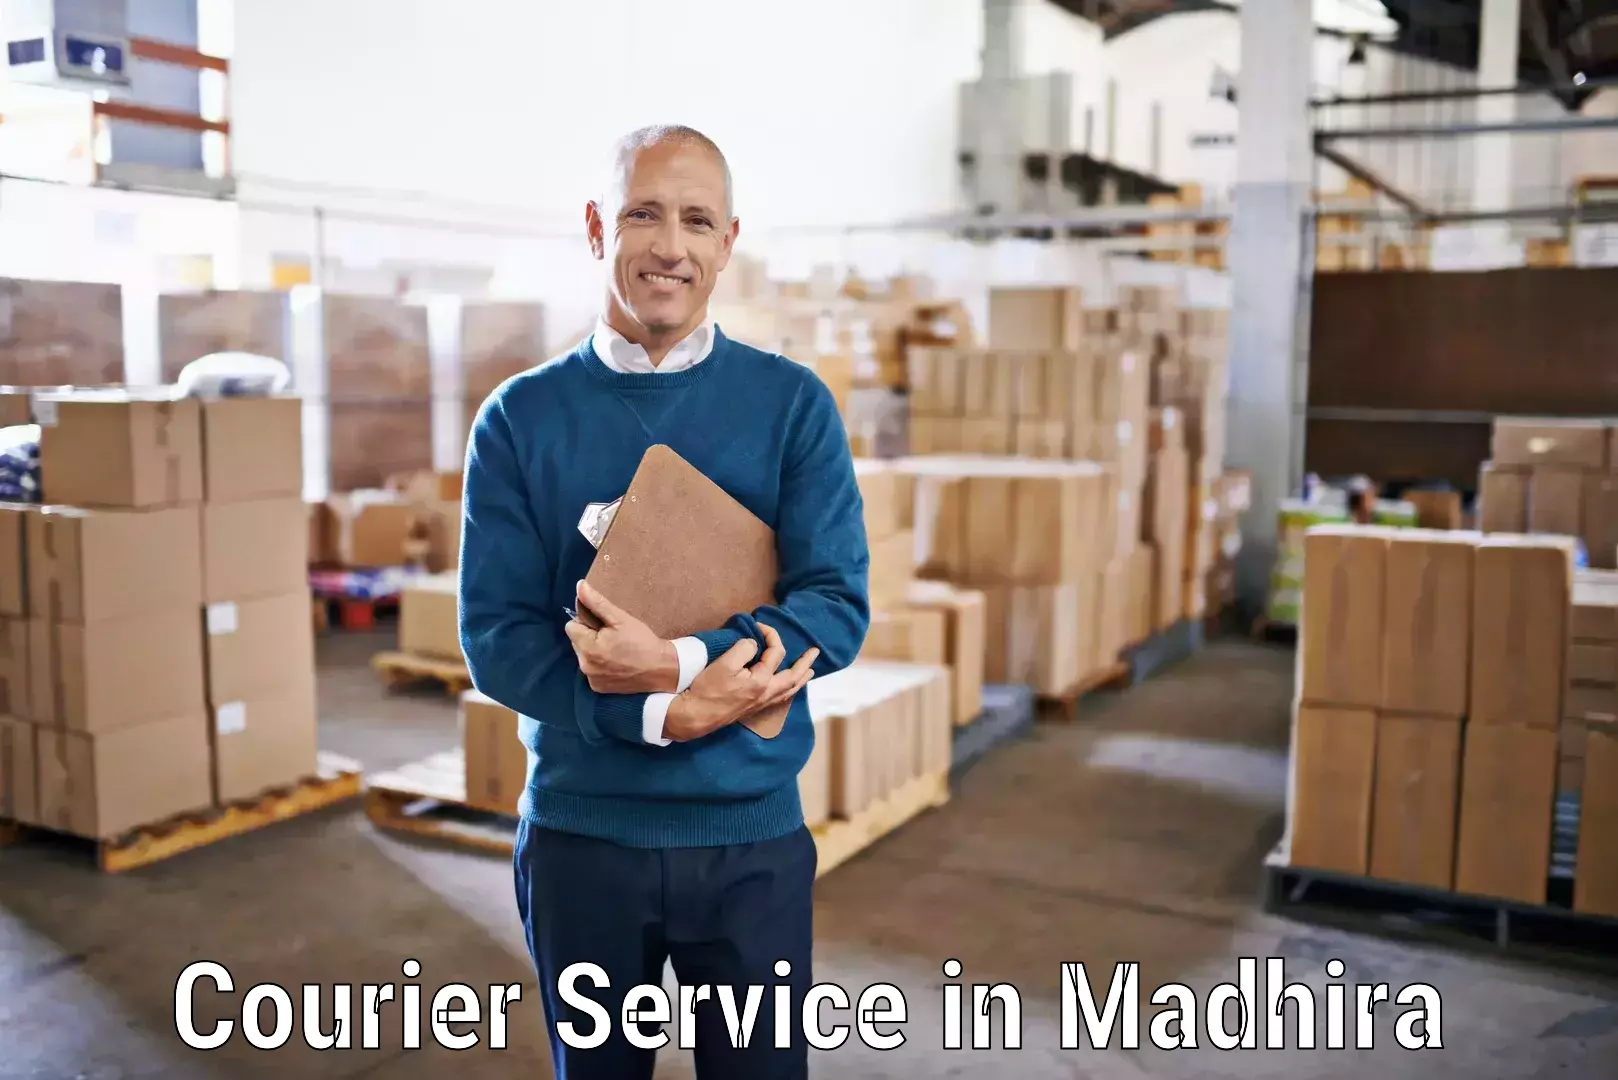 Courier service partnerships in Madhira